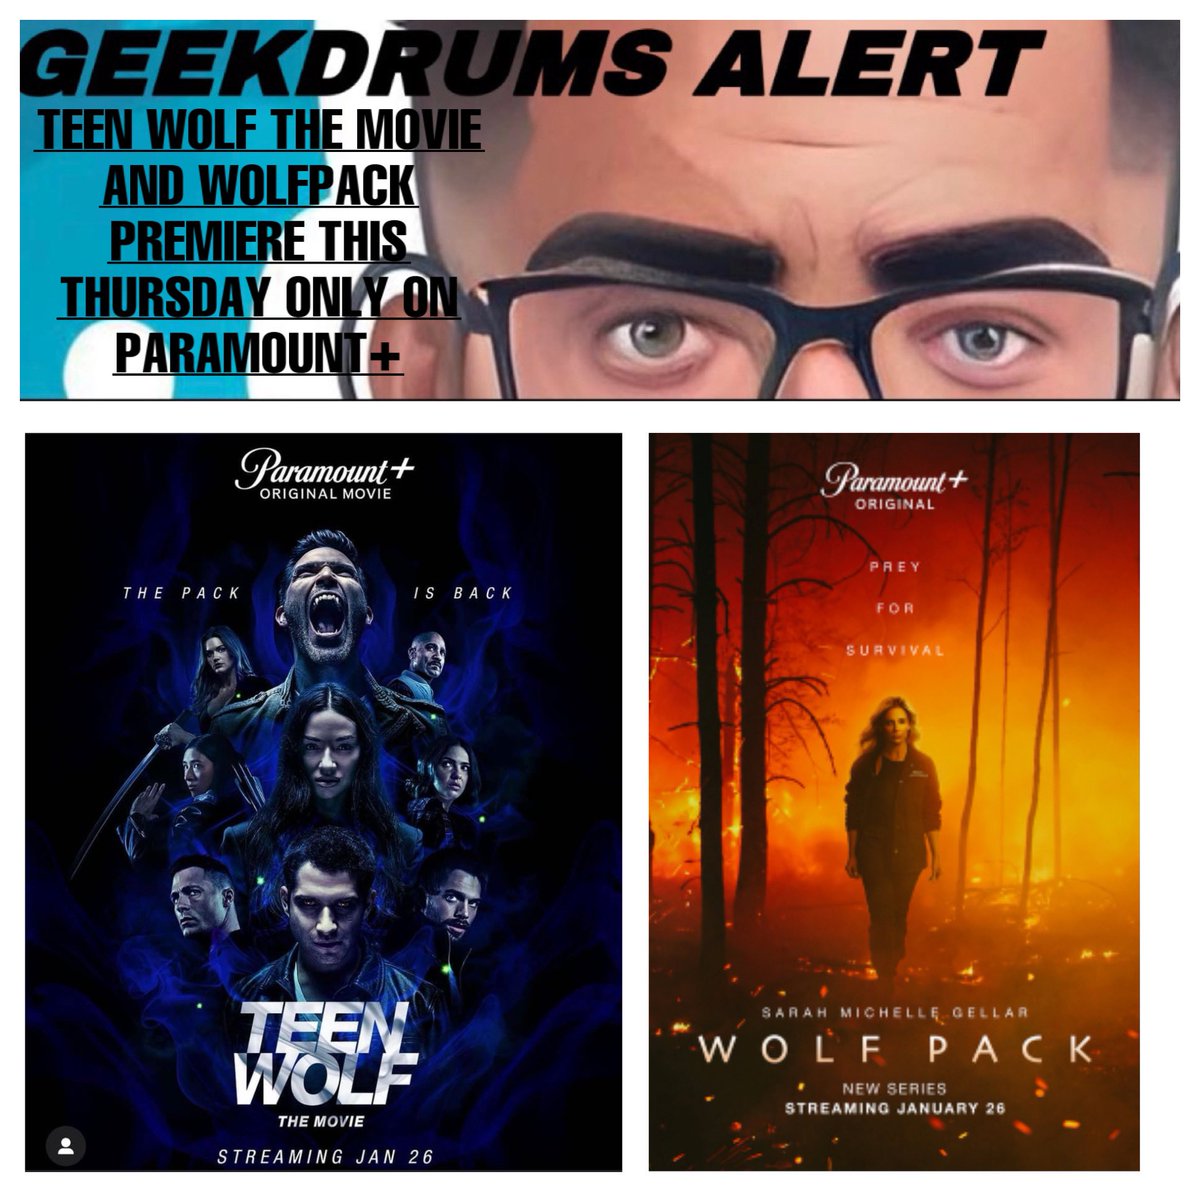 Teen wolf the movie and the new show Wolfpack premieres this Thursday! 
#wolfpack #teenwolf #mtv #paramountplus #tylerposey #truealpha #werewolf #werewolves #supernaturalcreatures